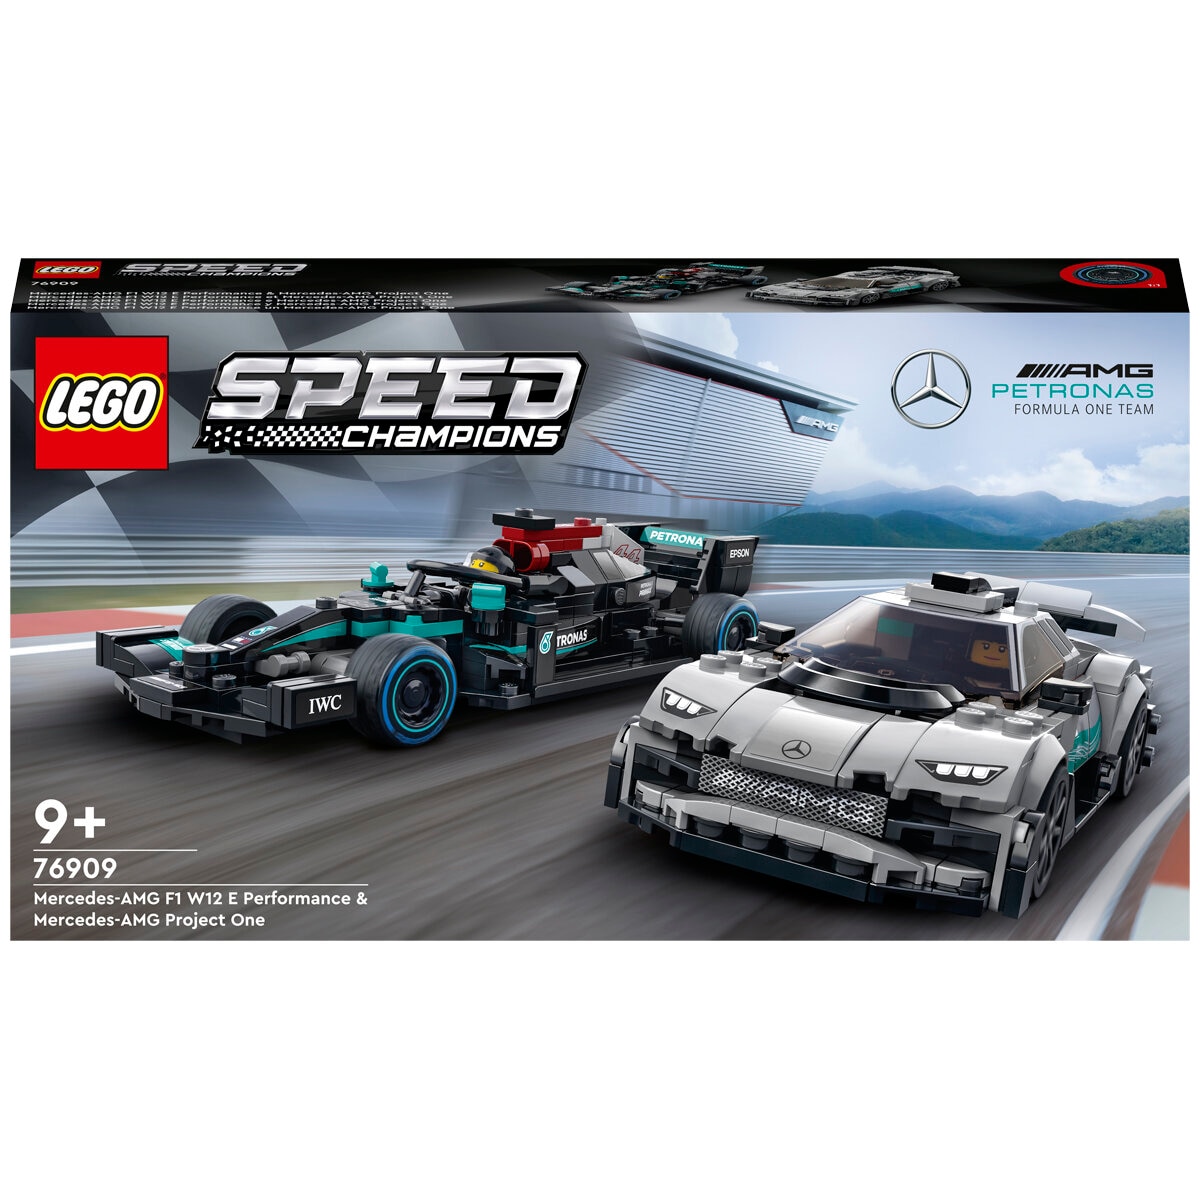 LEGO Speed Champions Mercedes-AMG F1 W12 E Performance & Mercedes-AMG Project One 76924